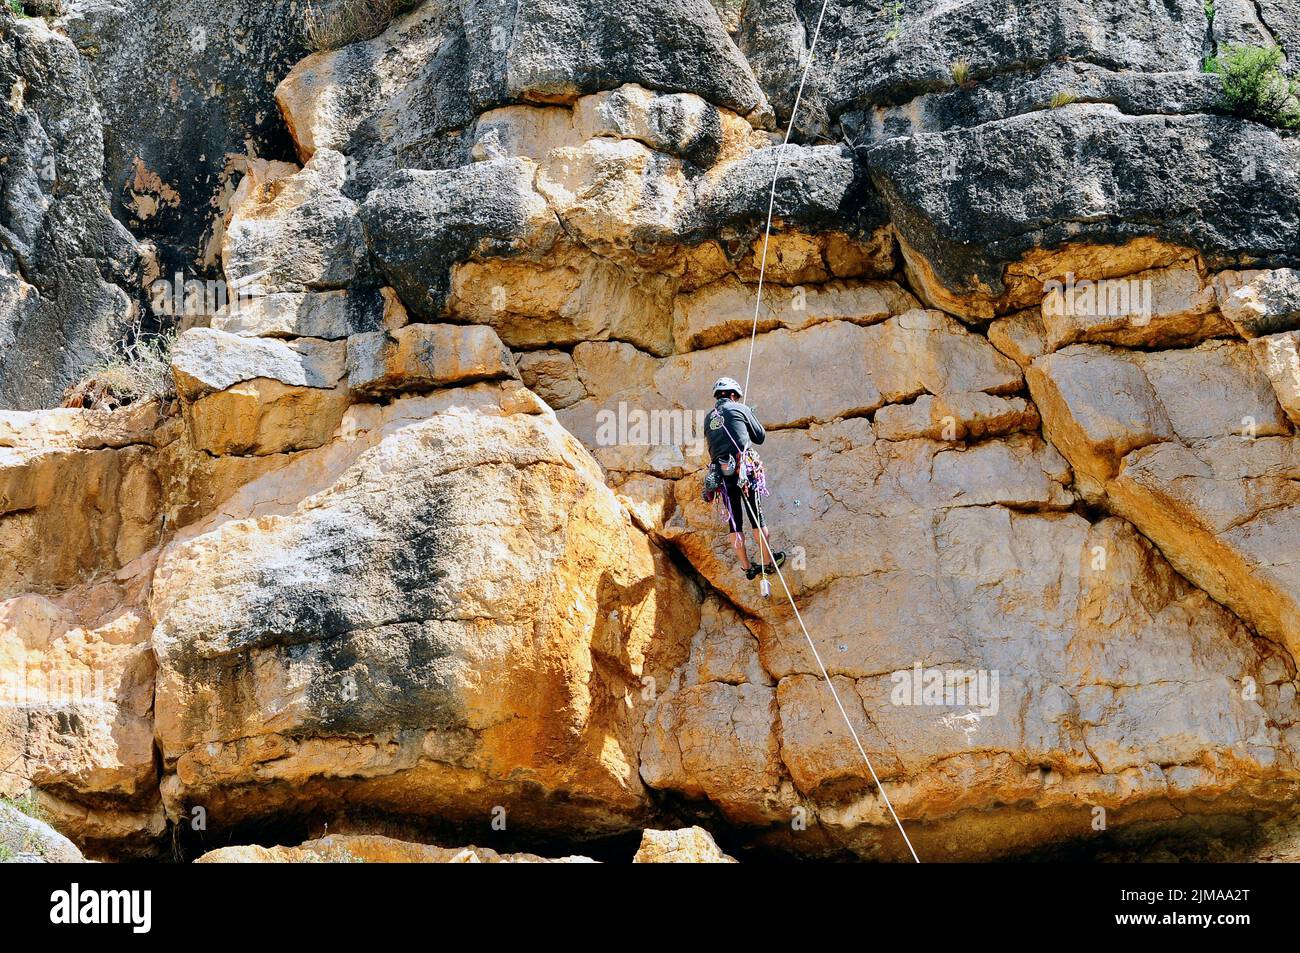 A rock climber with a safety rope, climbing on a flat rock with